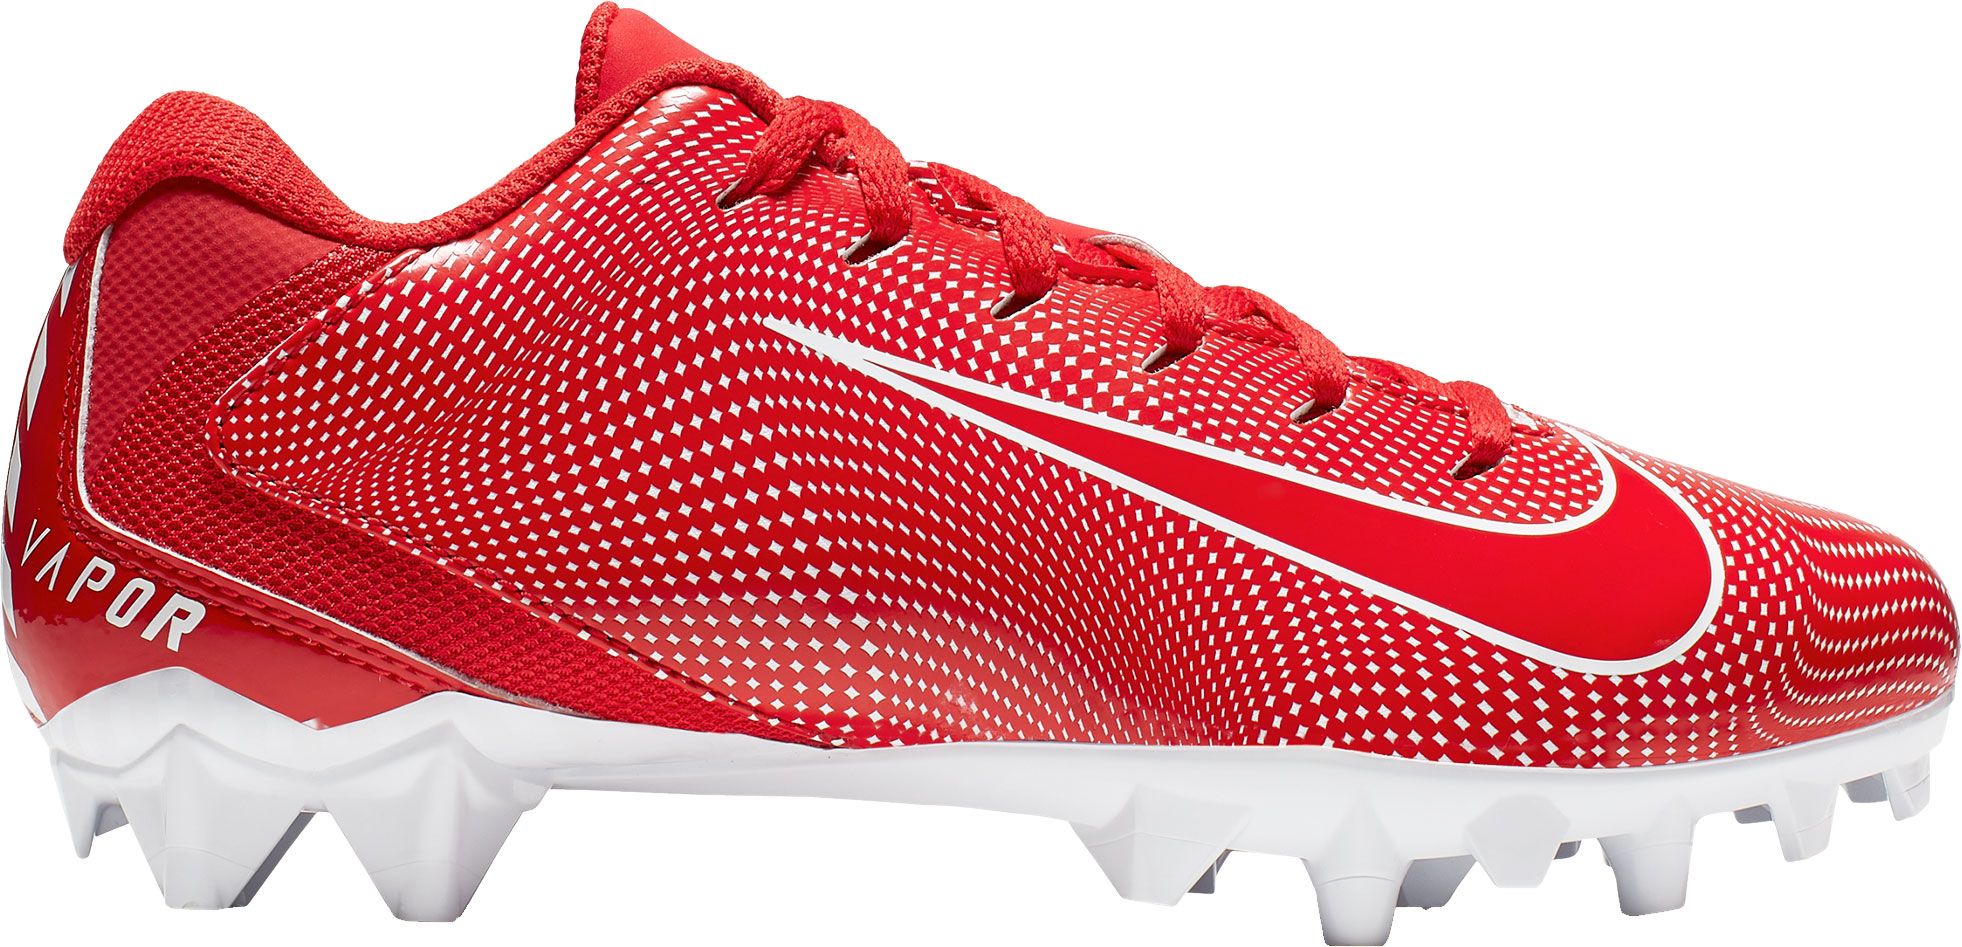 nike youth football shoes